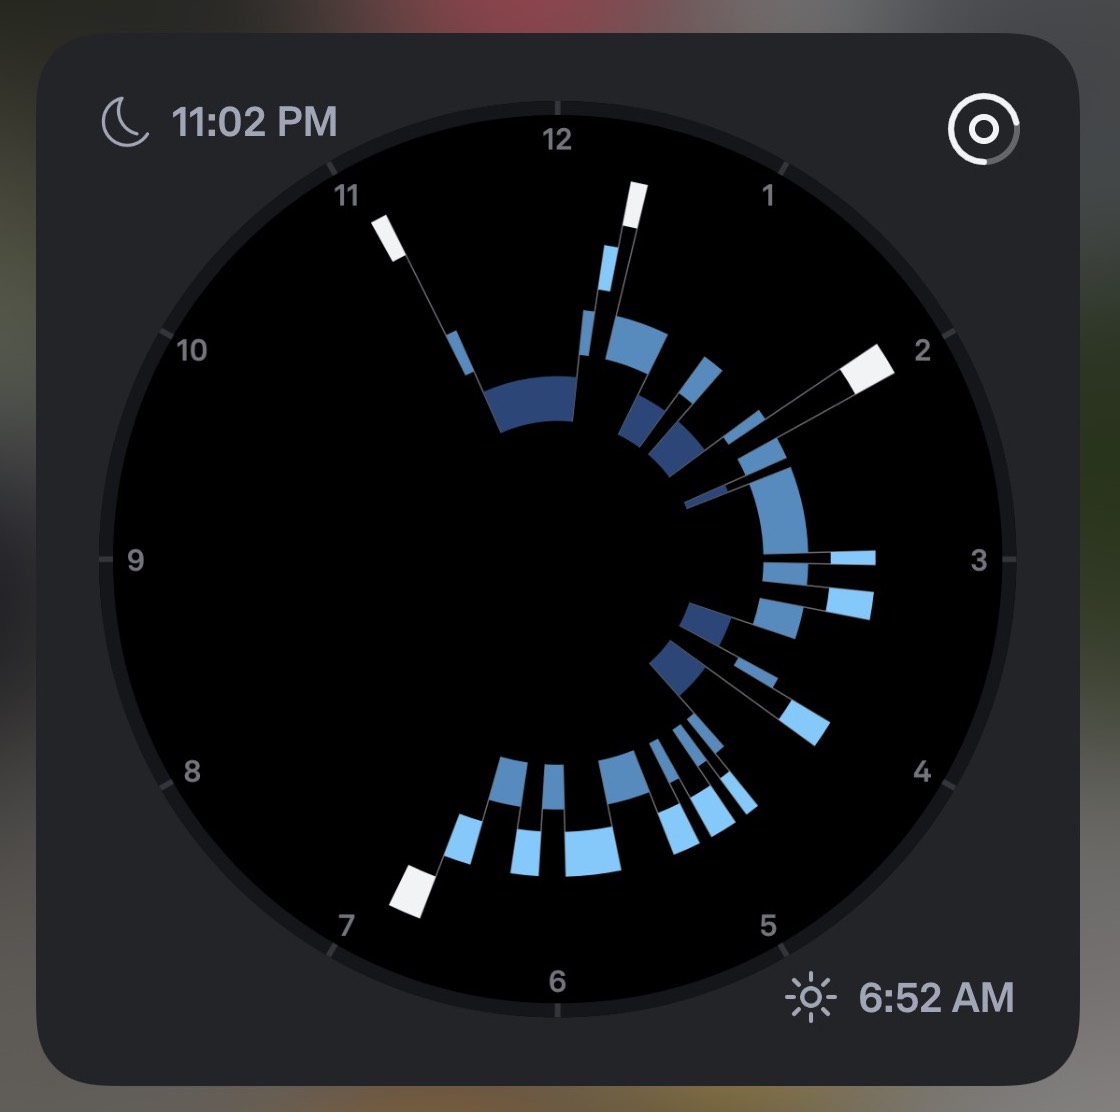 The large Oura hypnogram widget, displaying the time, the ring battery status, and the previous night's sleep stages in a clockface style graph